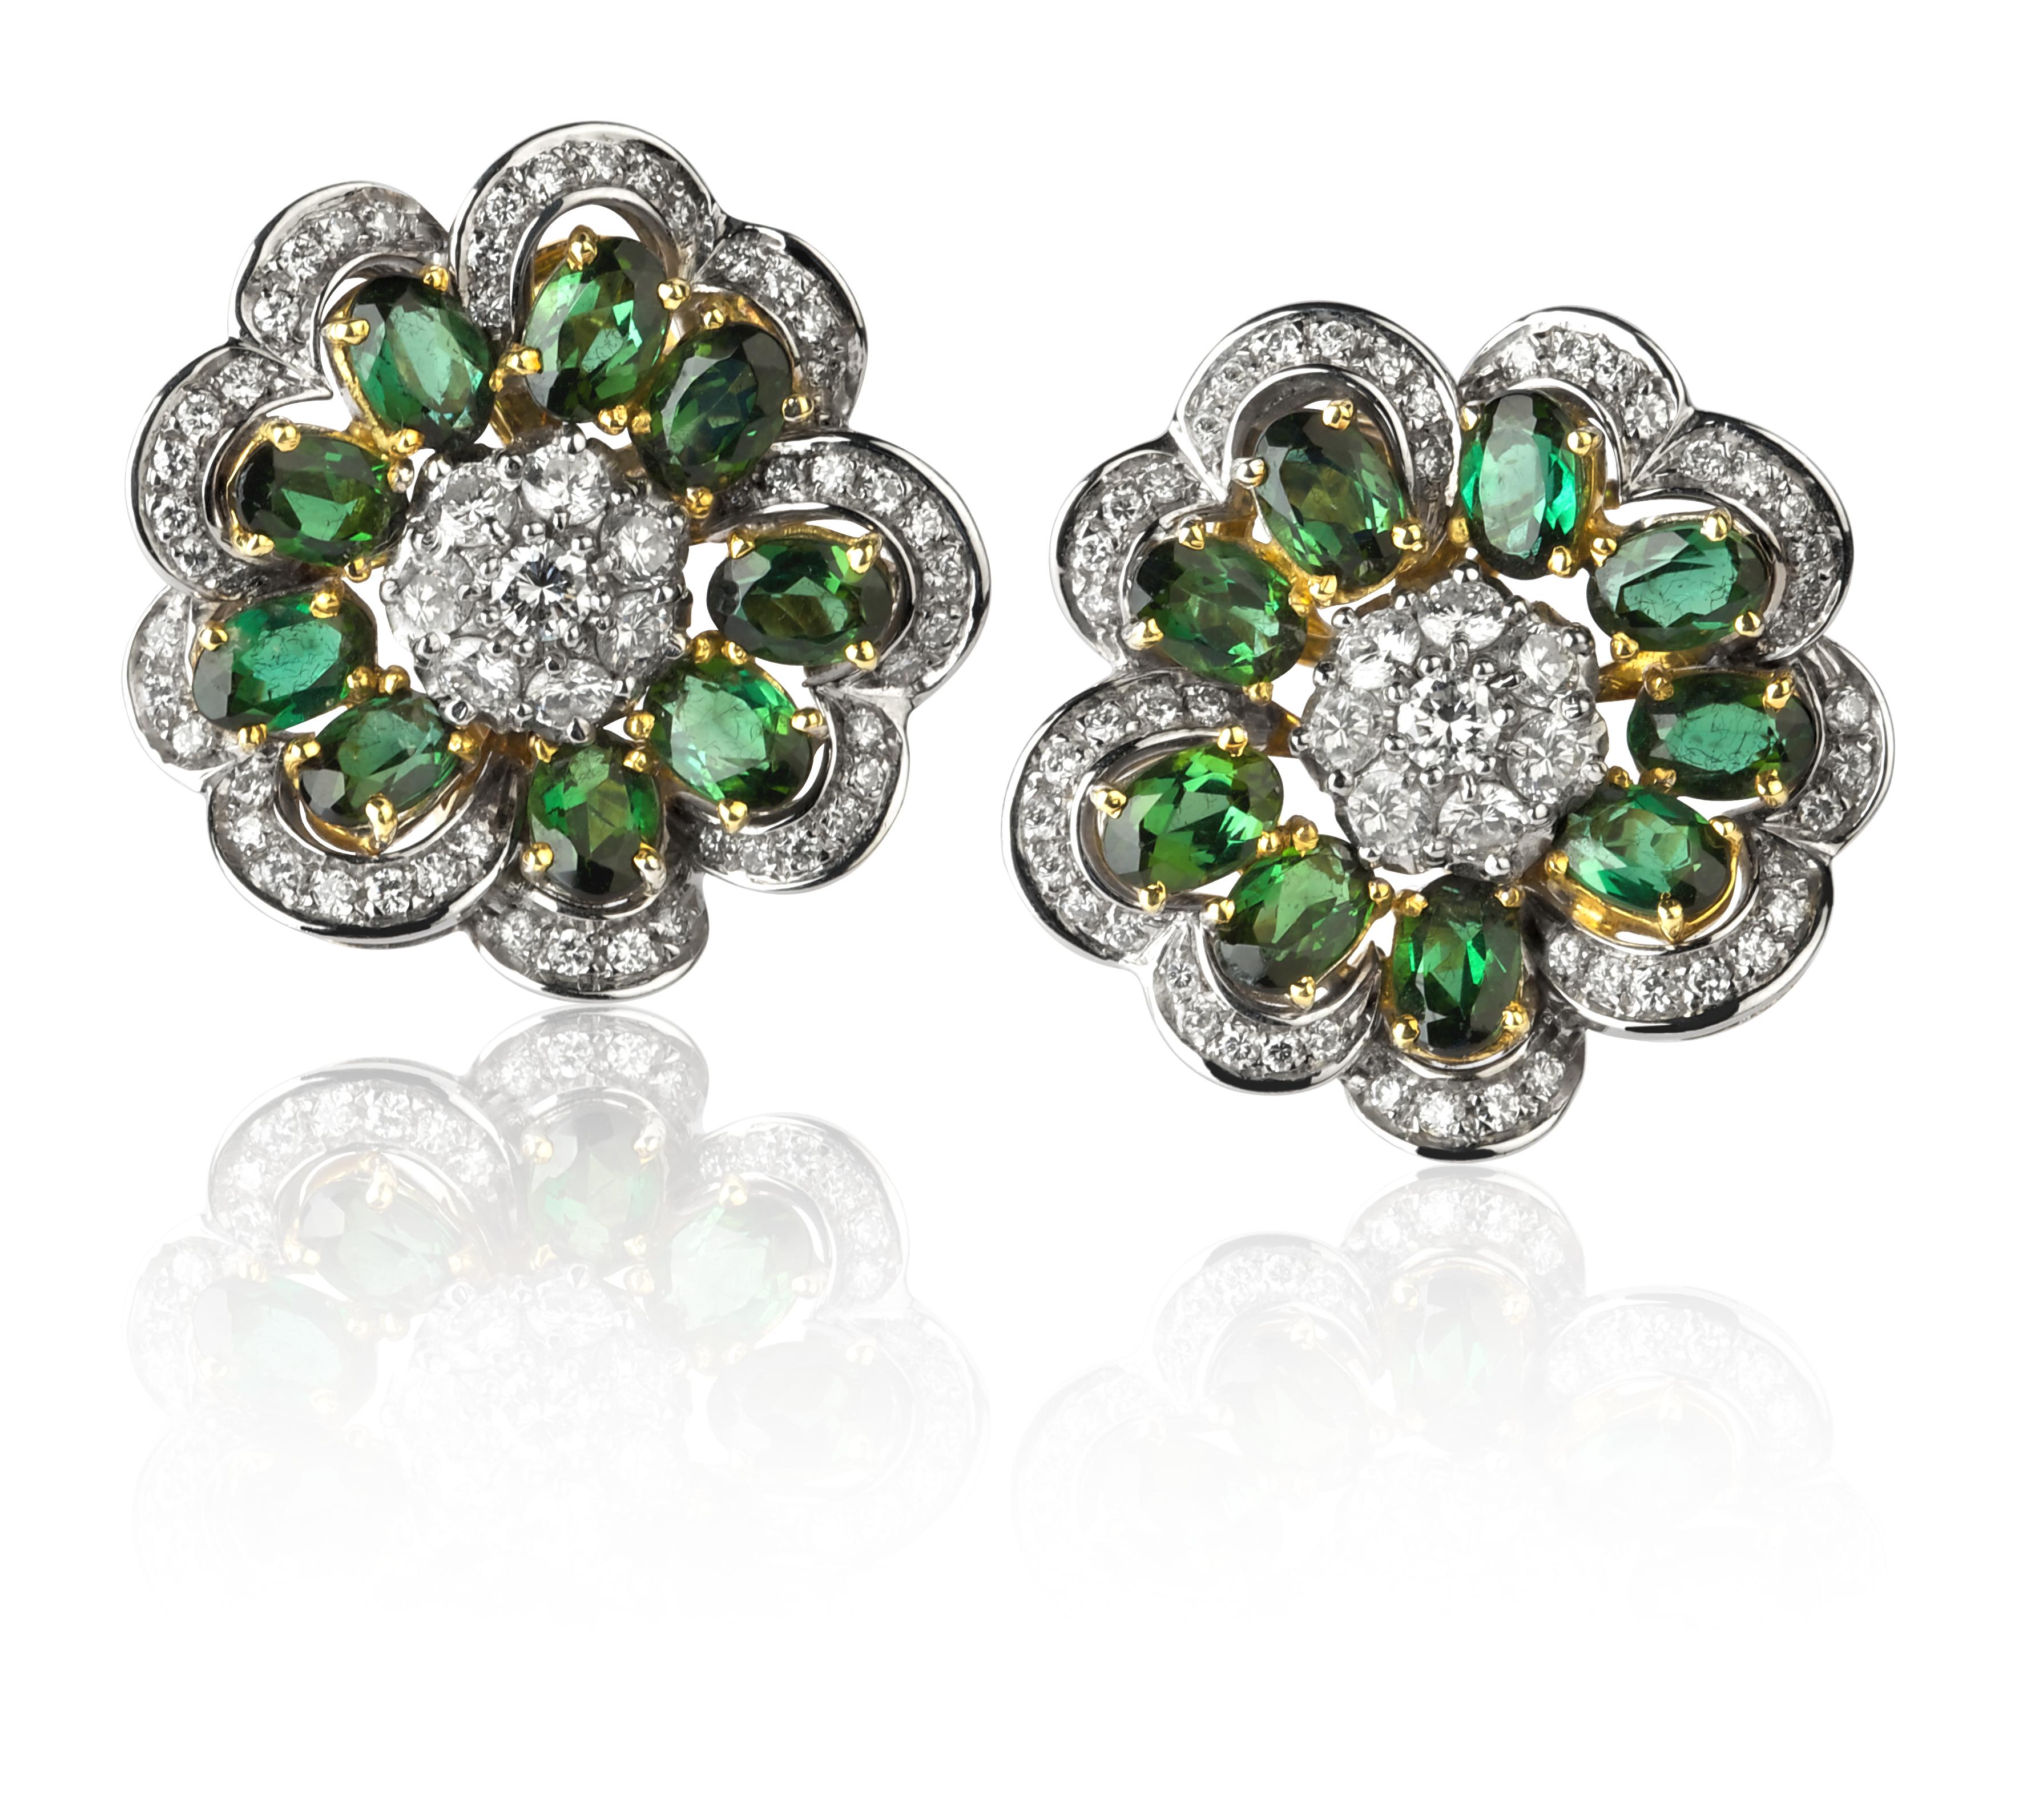 Brilliant Cut Vintage Earrings from ANGELETTI PRIVATE COLLECTION Gold Green Tourmaline Diamond For Sale